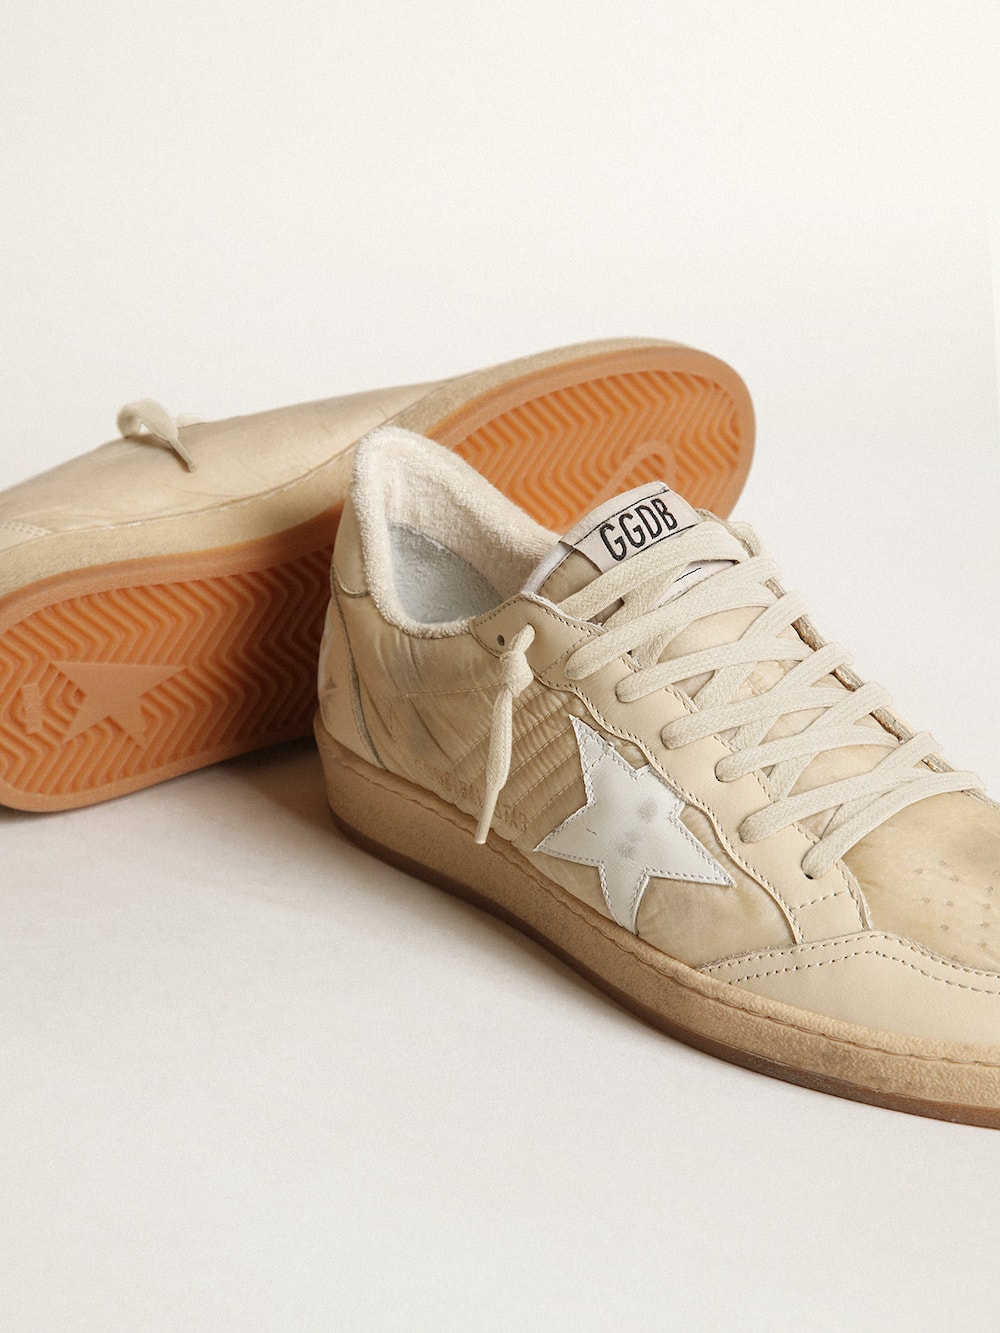 Golden Goose - Men's Ball Star in white nylon with white star and heel tab in 